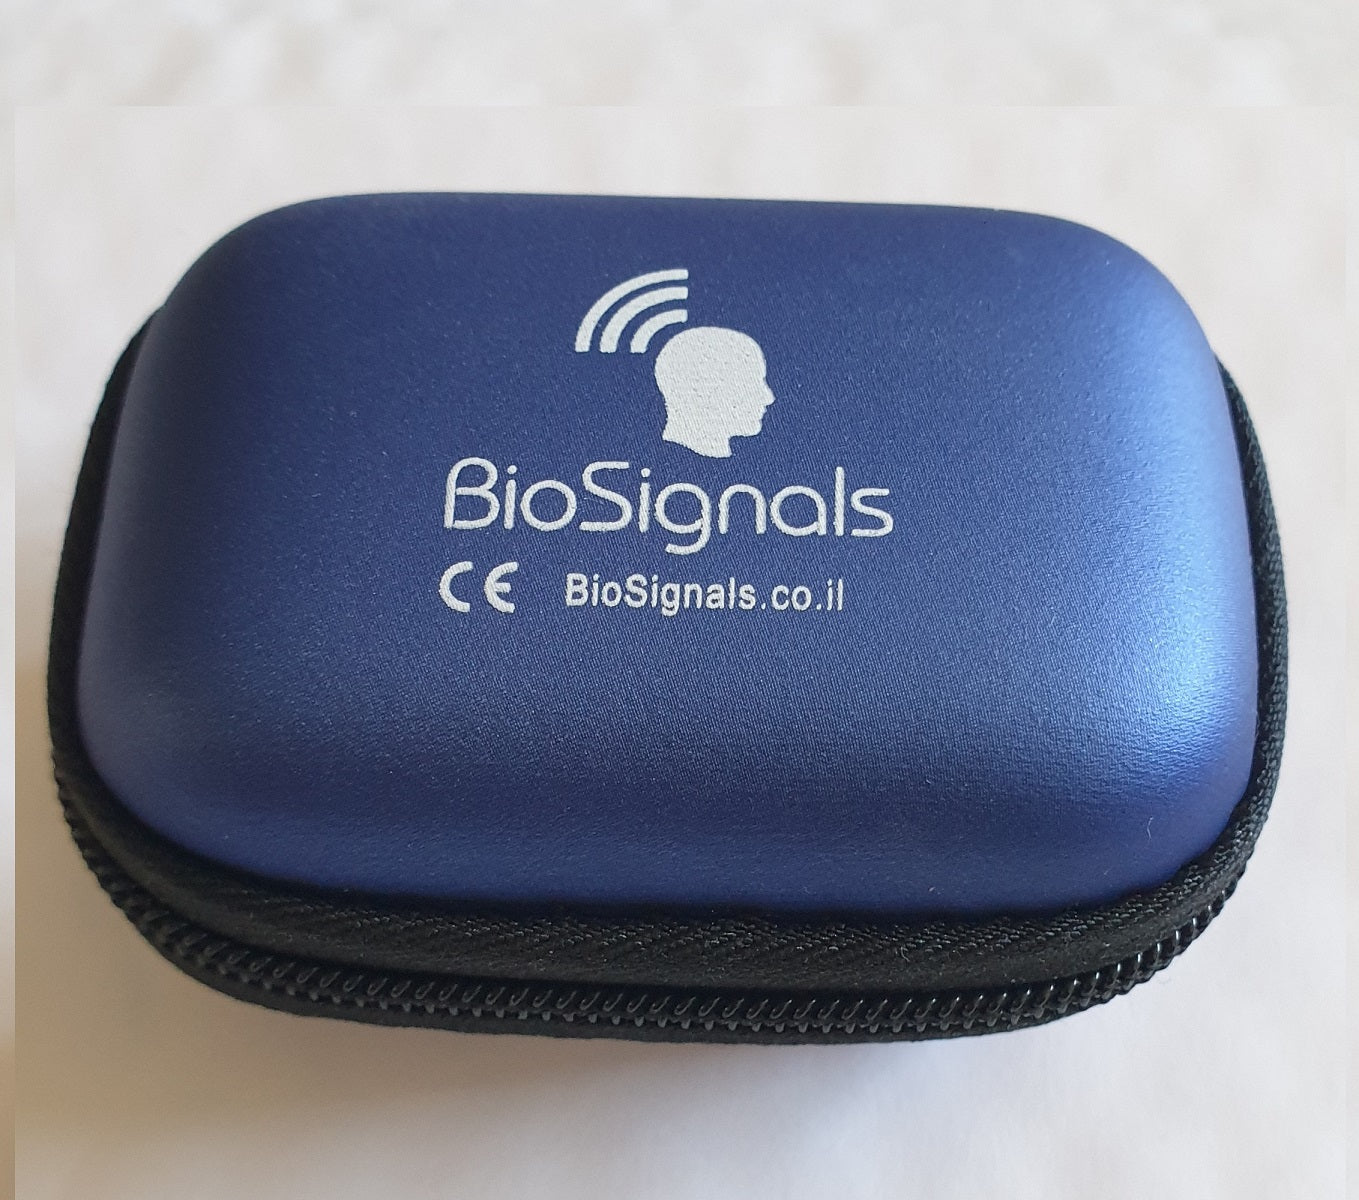 BioSignals AI-HRV Hardware & Software to increase longevity. For commercial or Home use.